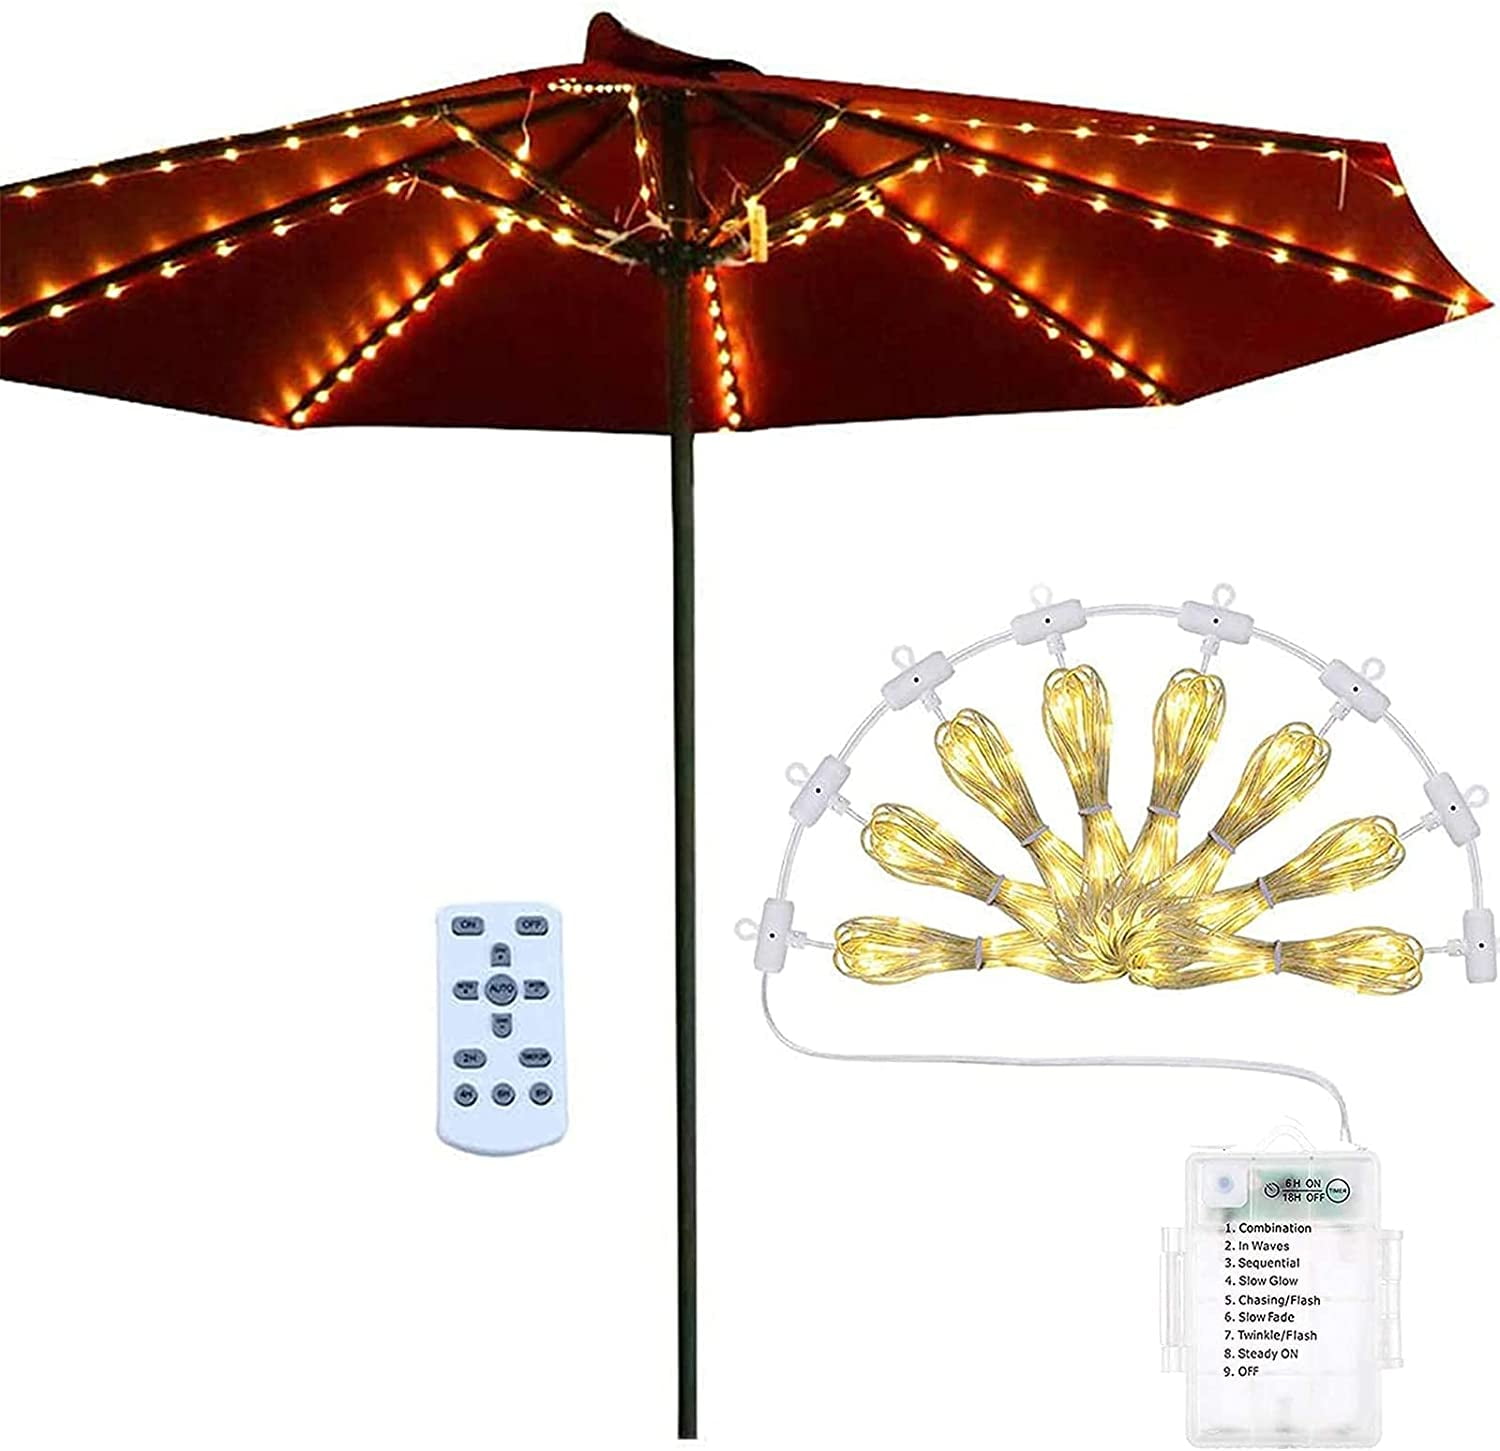 Patio Umbrella Lights 3AA Battery Operated String Light with Remote Control 8 Brightness Modes 104 LEDs Waterproof Outdoor LED Umbrella Lights for Pole Camping